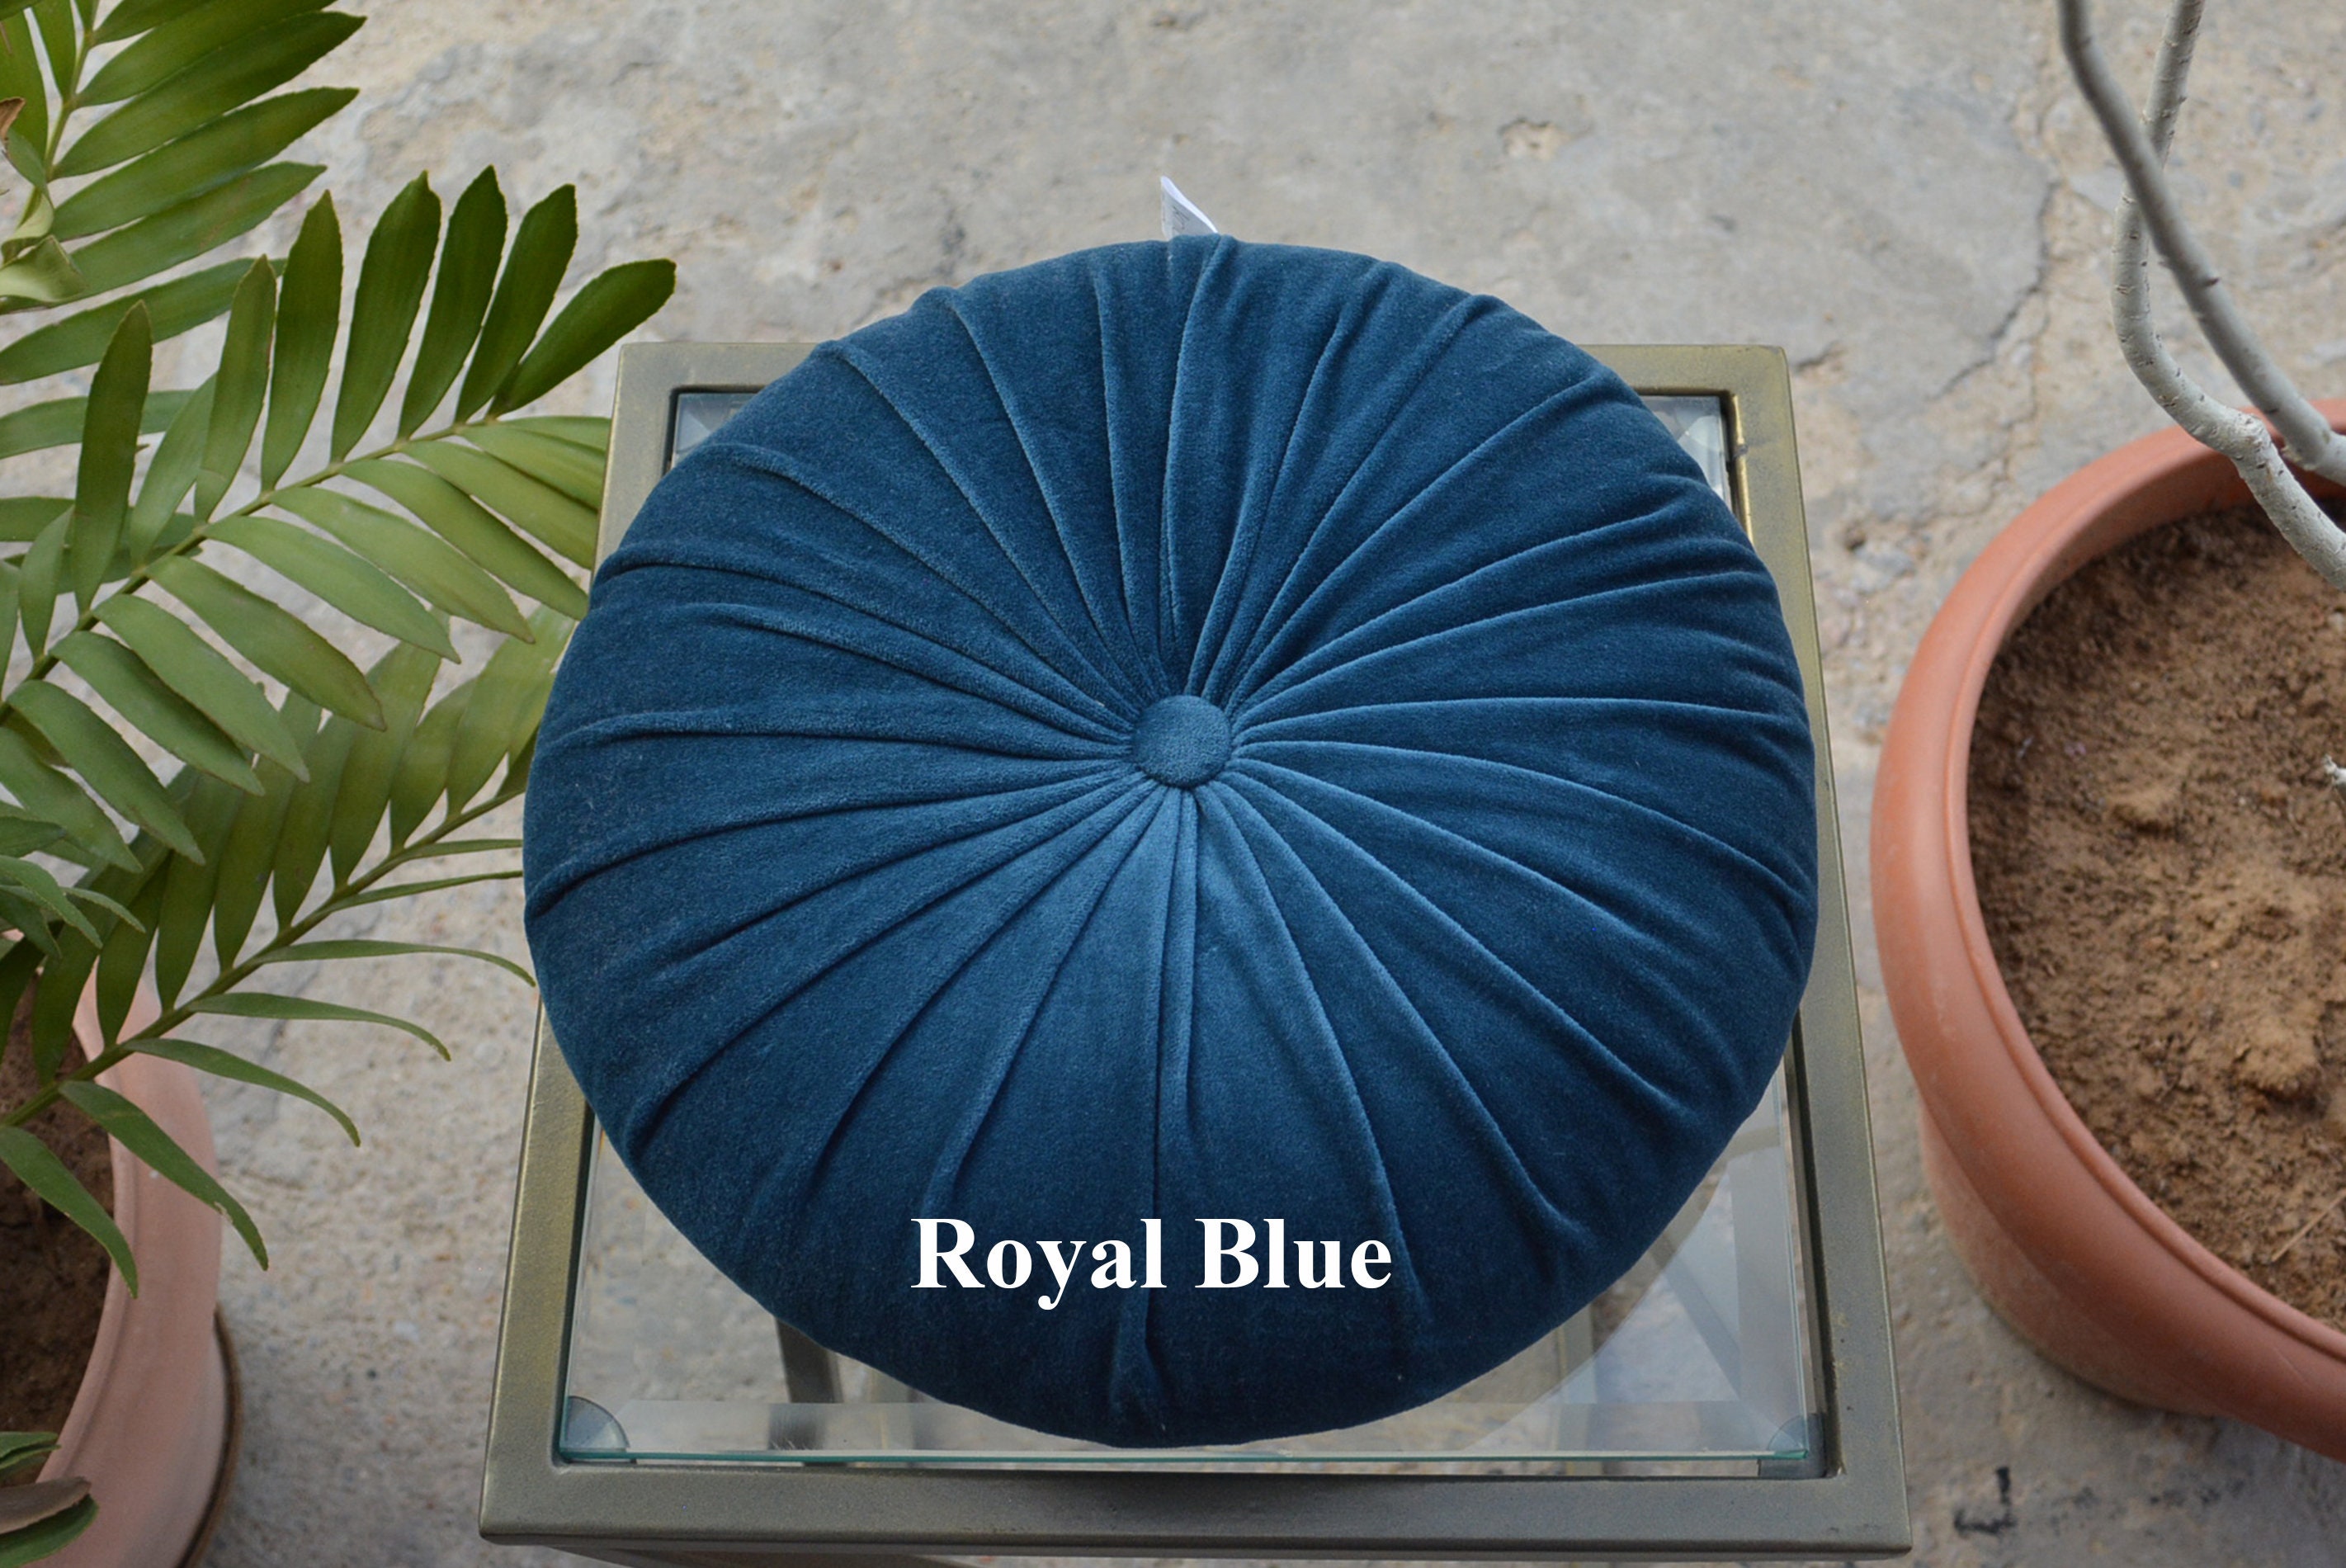 Velvet Round Chair Pad Cushion Round Dinning Seat Cushion Round Floor  Cushion Decorative Cushion Round Outdoor Cushion for Bar Stool 